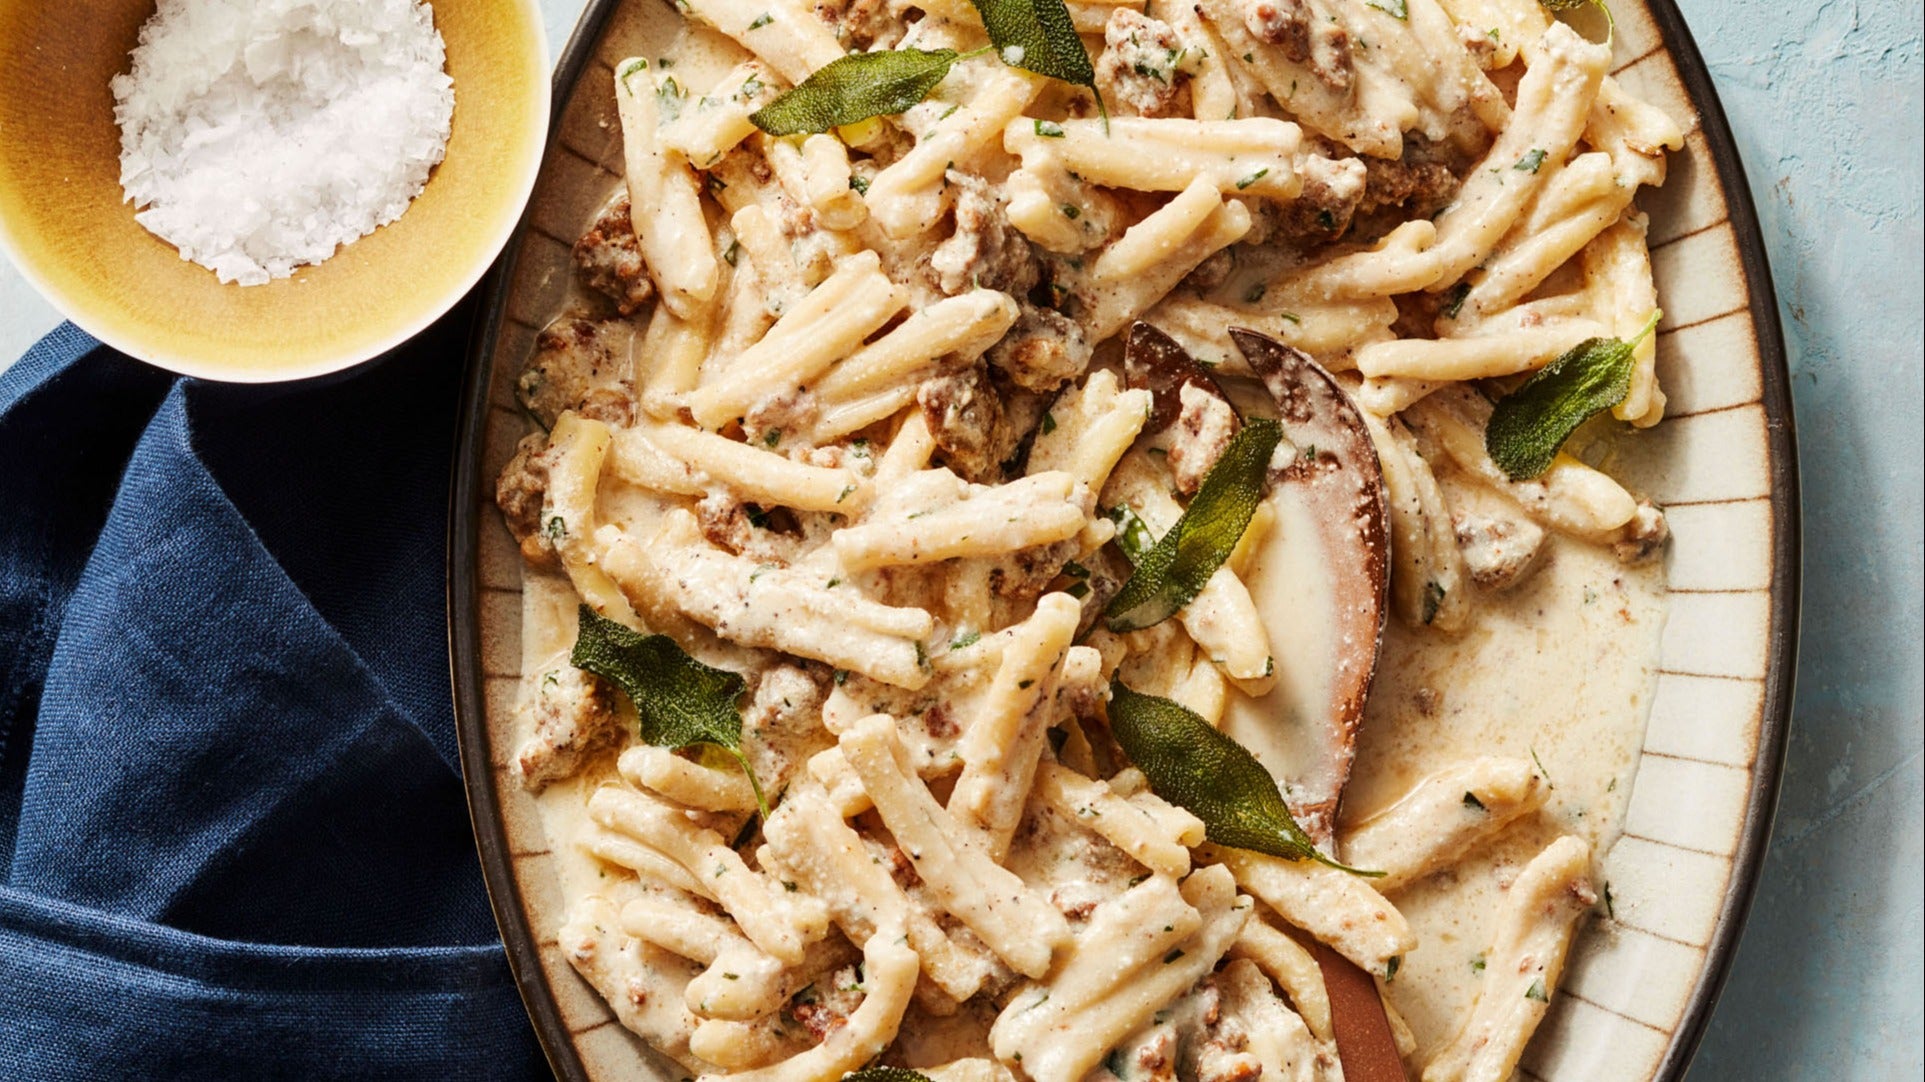 Rachael Ray's Brown Butter, Sage & Sausage Casarecce